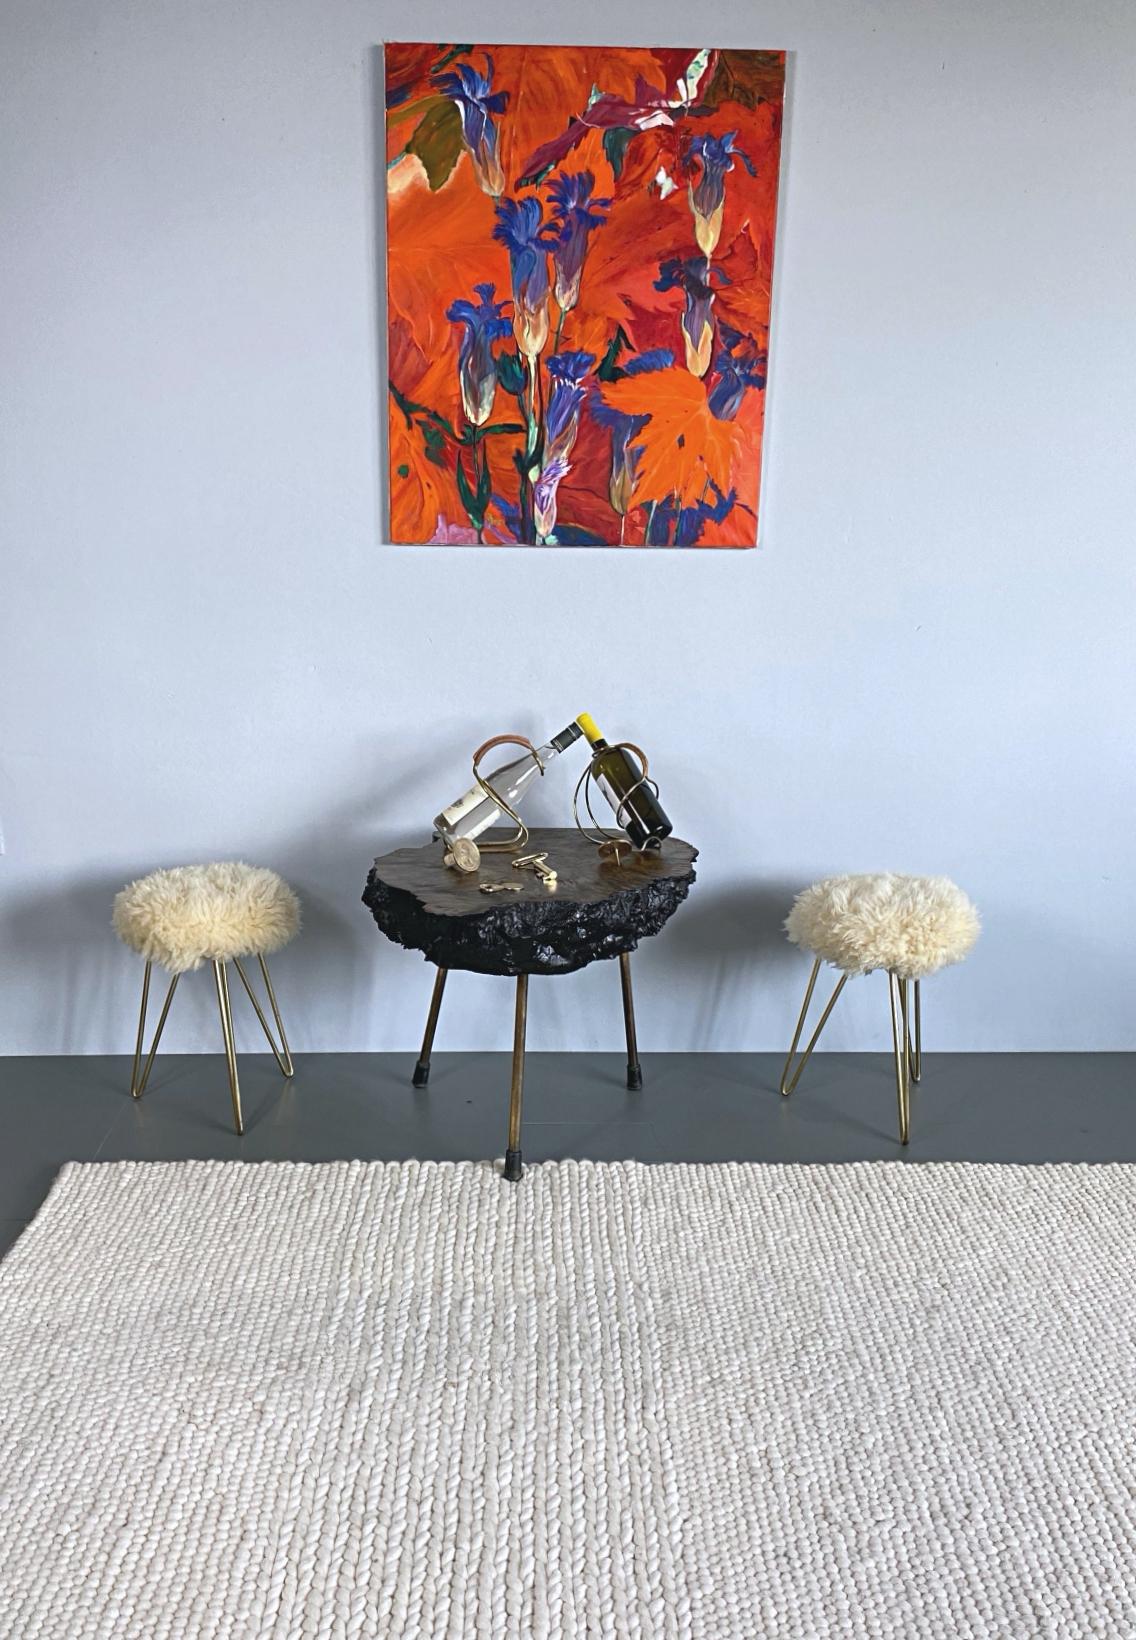 Pair of very decorative French 1950s shearling stools. The three brass hairpin legs serve as a reduced, minimalist counterpart to the wild fur. Freshly professionally cleaned.

We found these objects at an antique fair in Southern France.

We